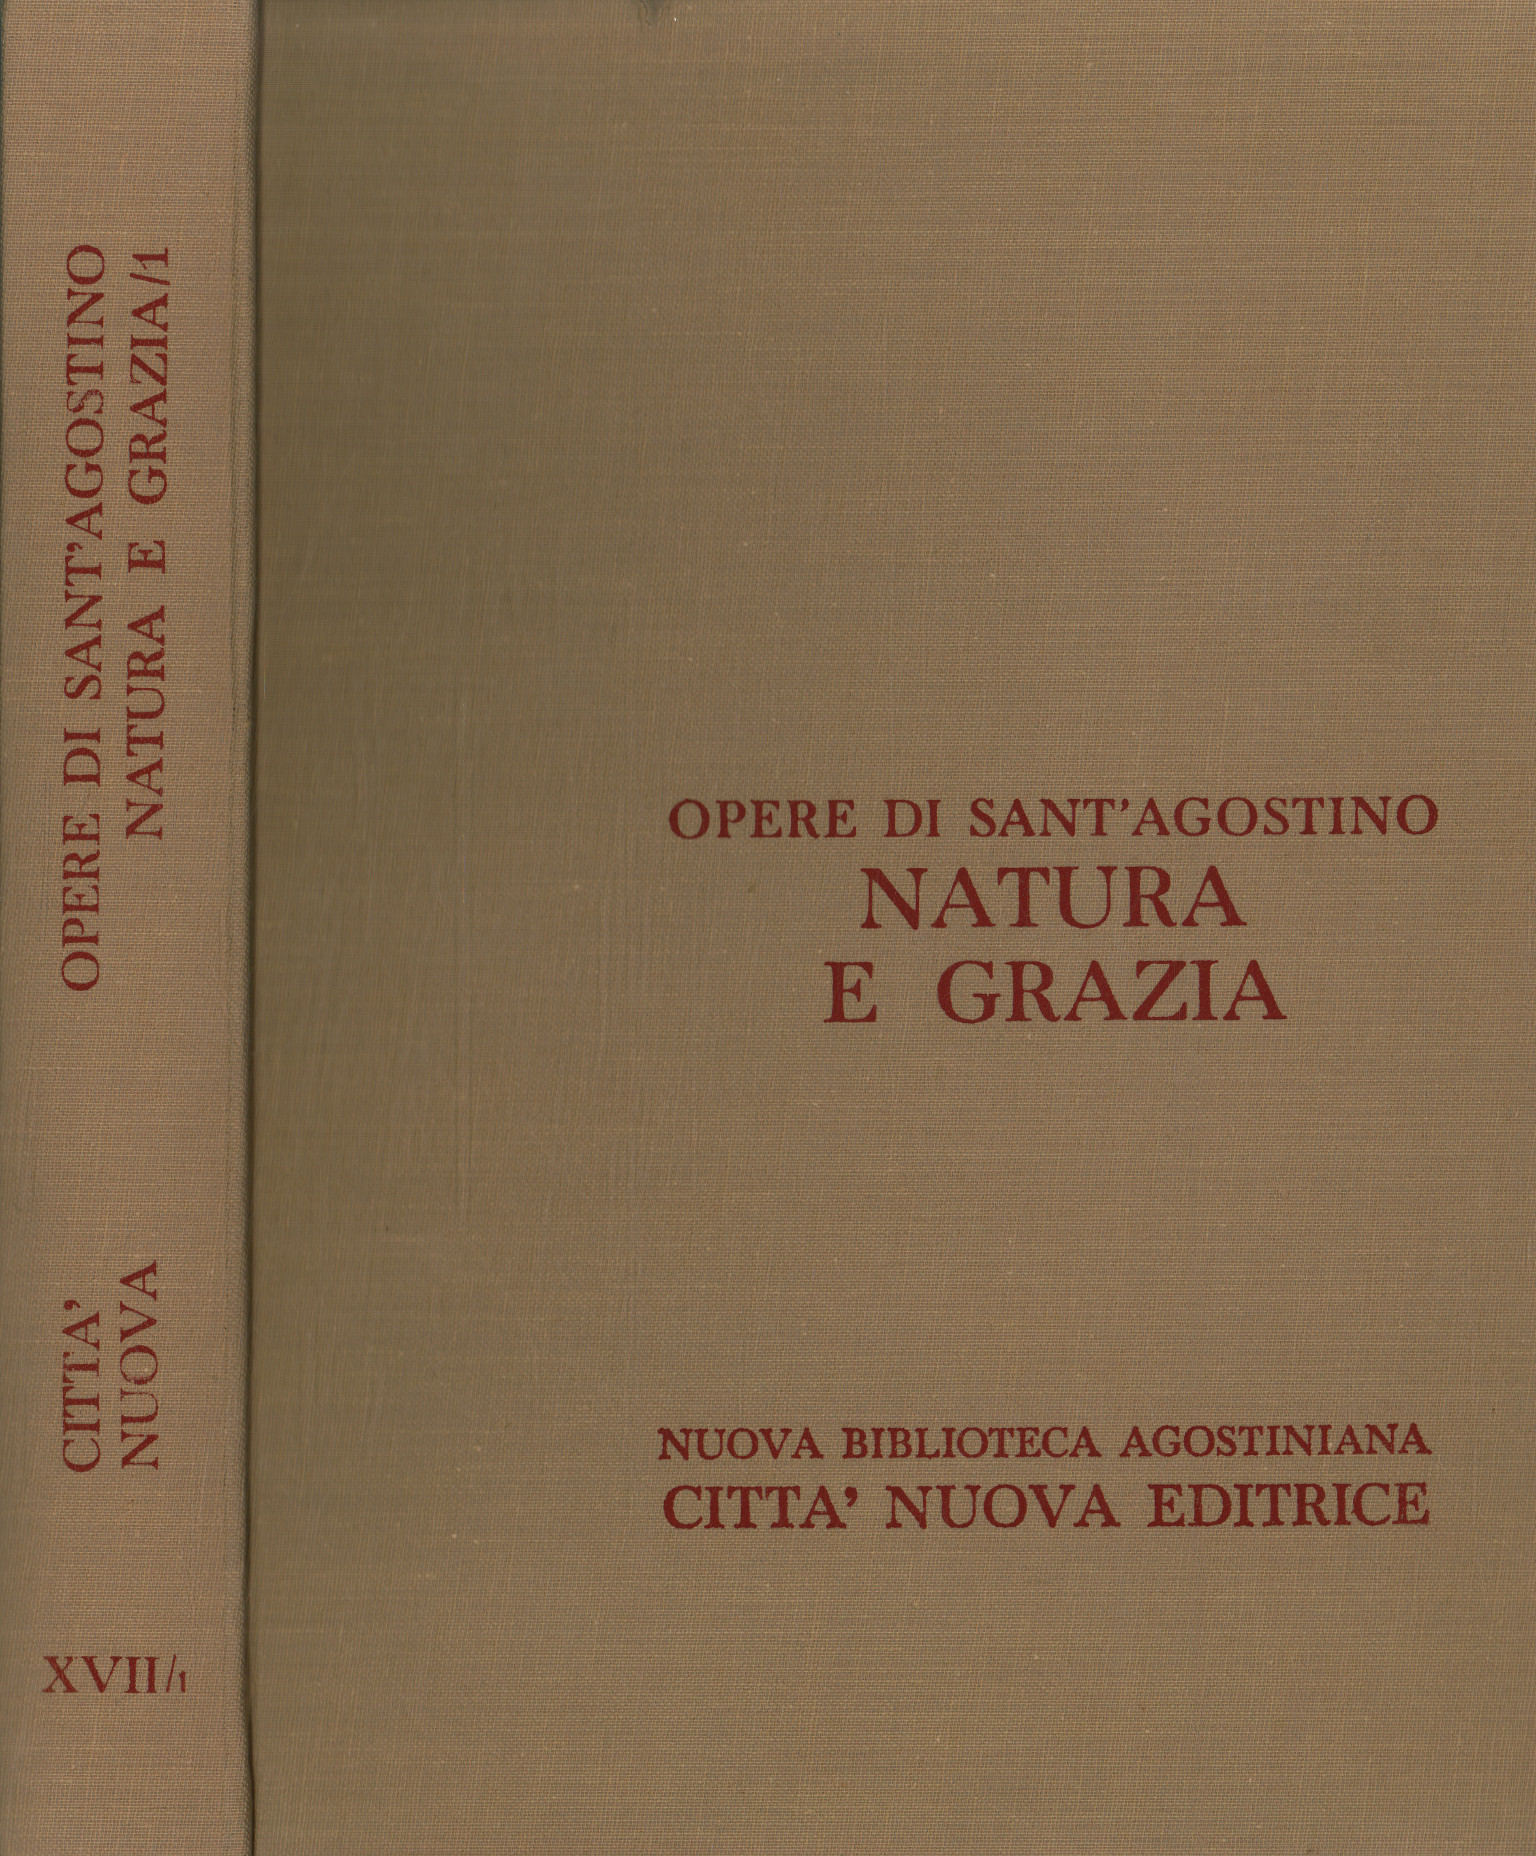 Works of Sant'Agostino. Nature